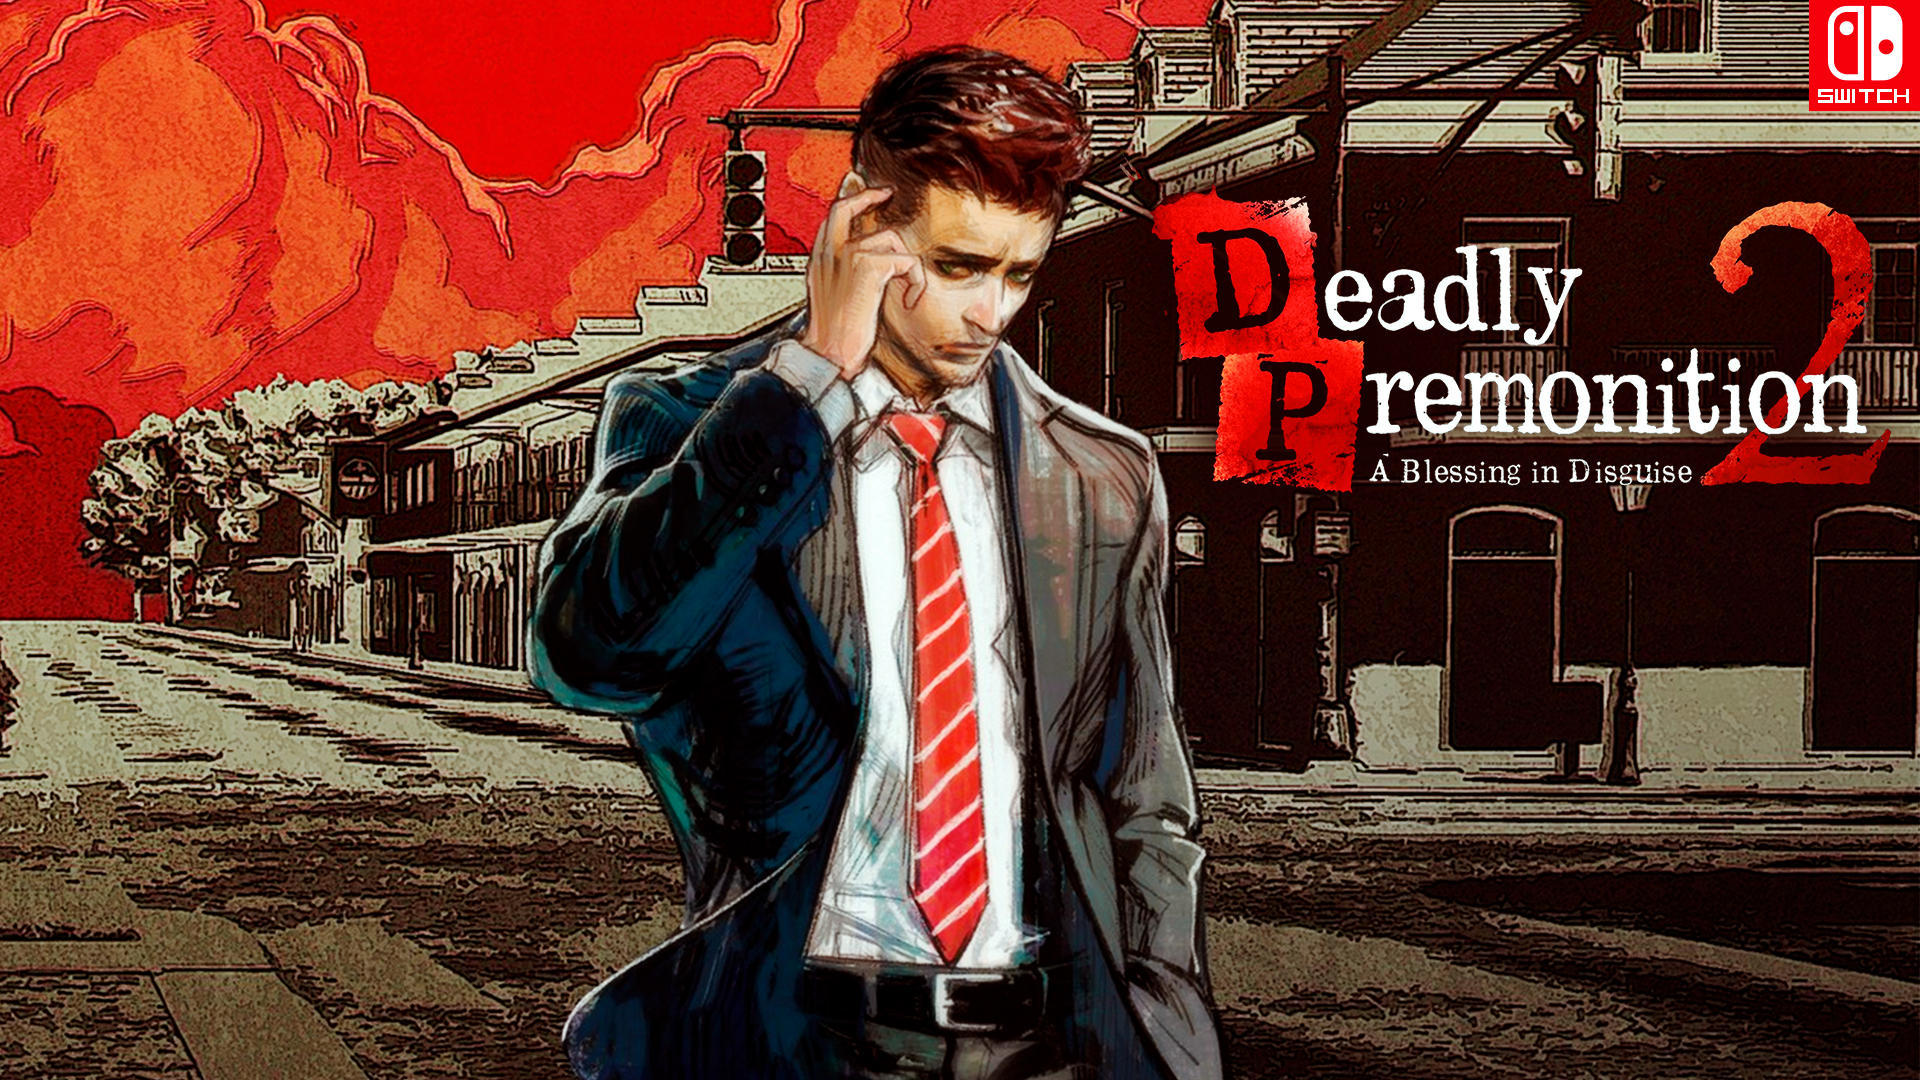 deadly premonition 2 playstation download